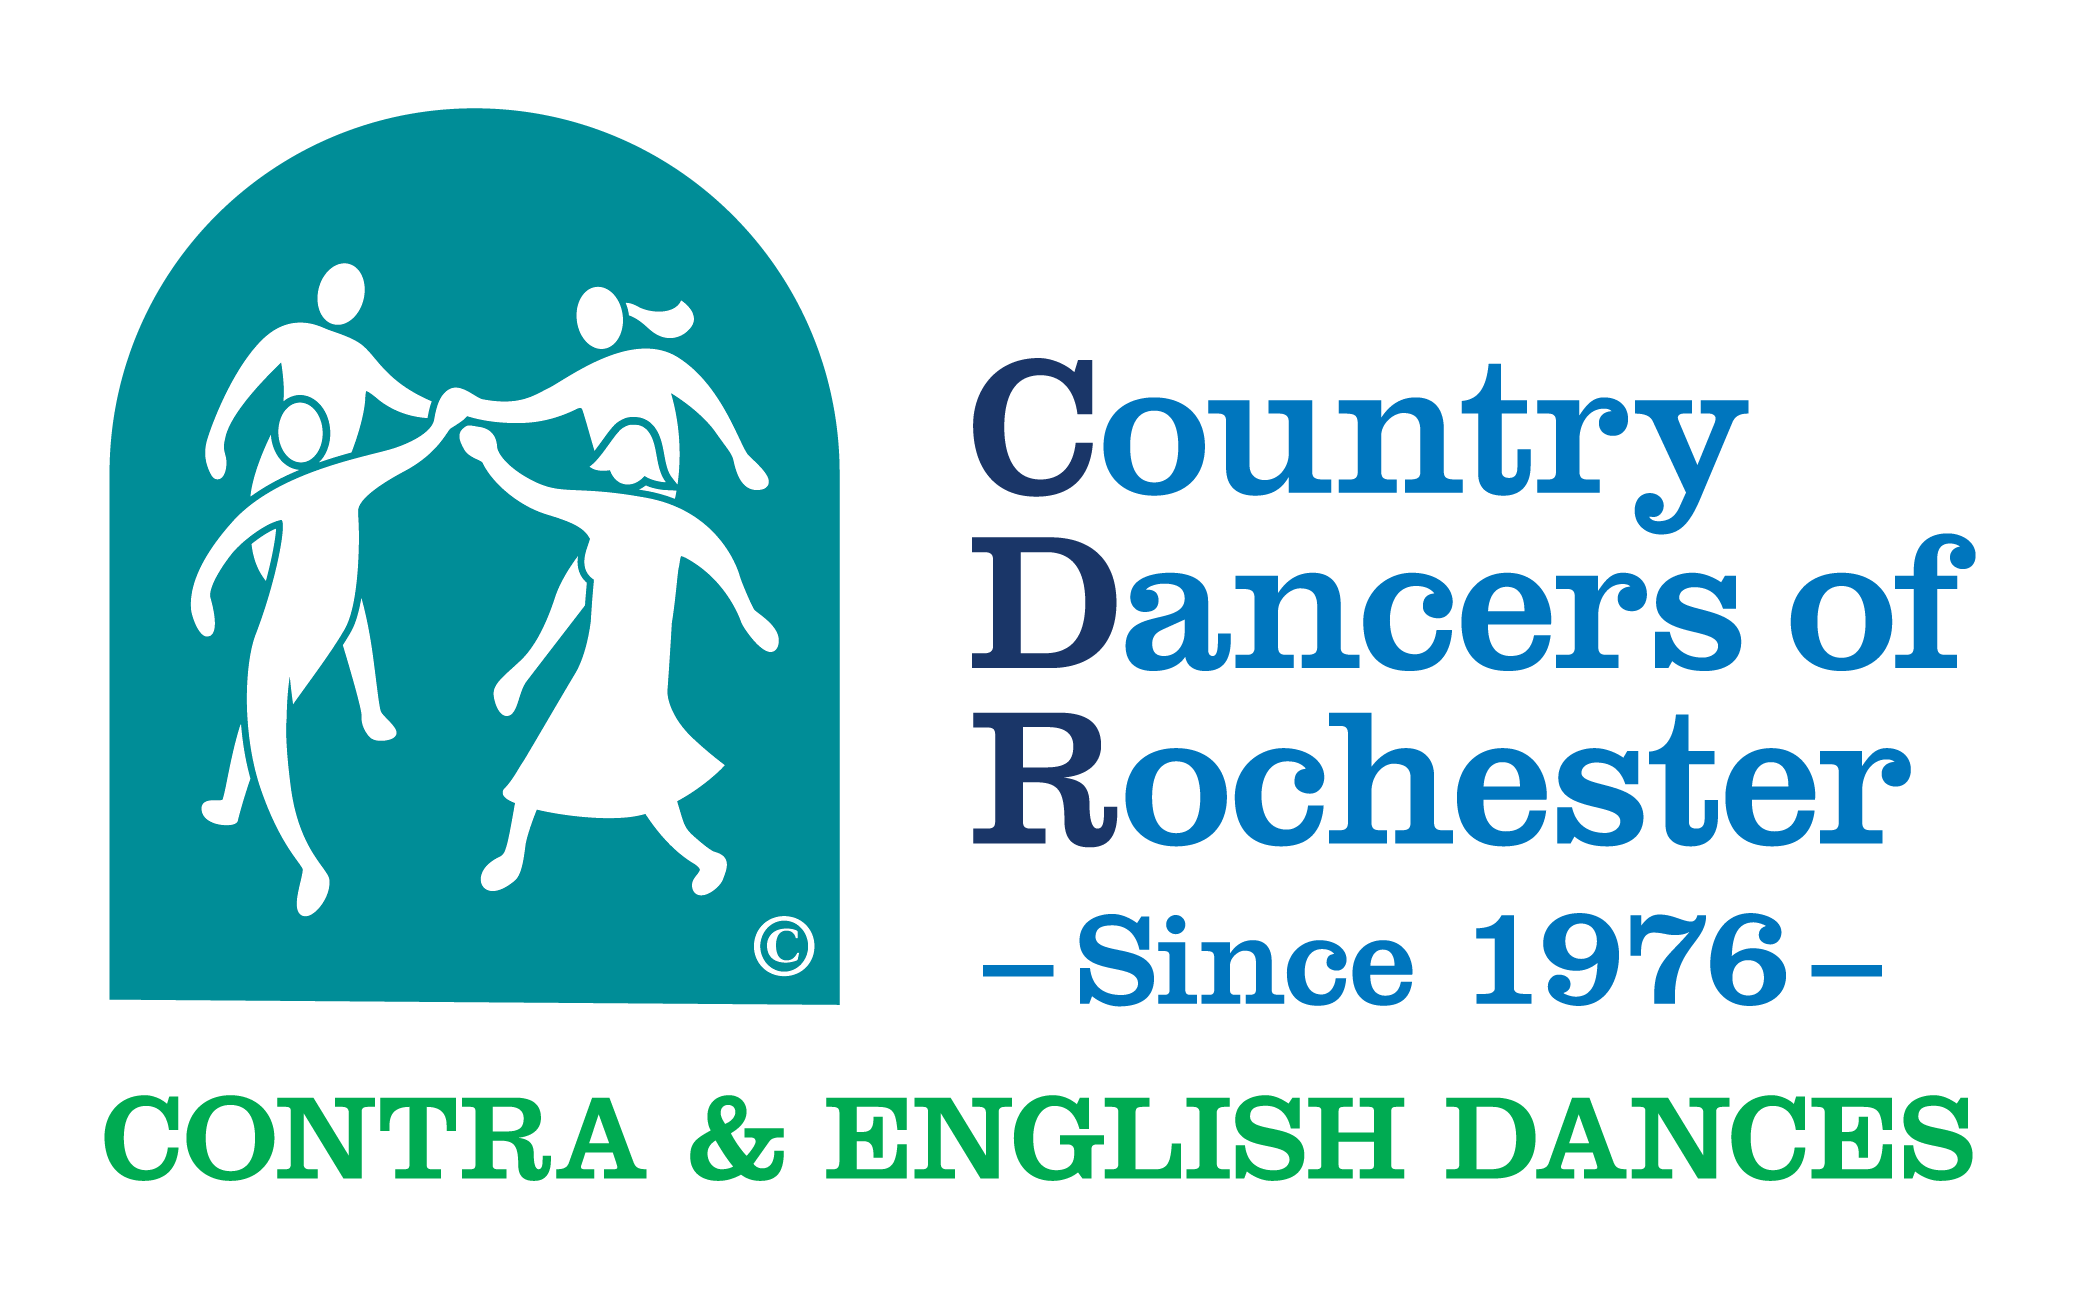 Country Dancers of Rochester—Contra & English Dances Since 1976